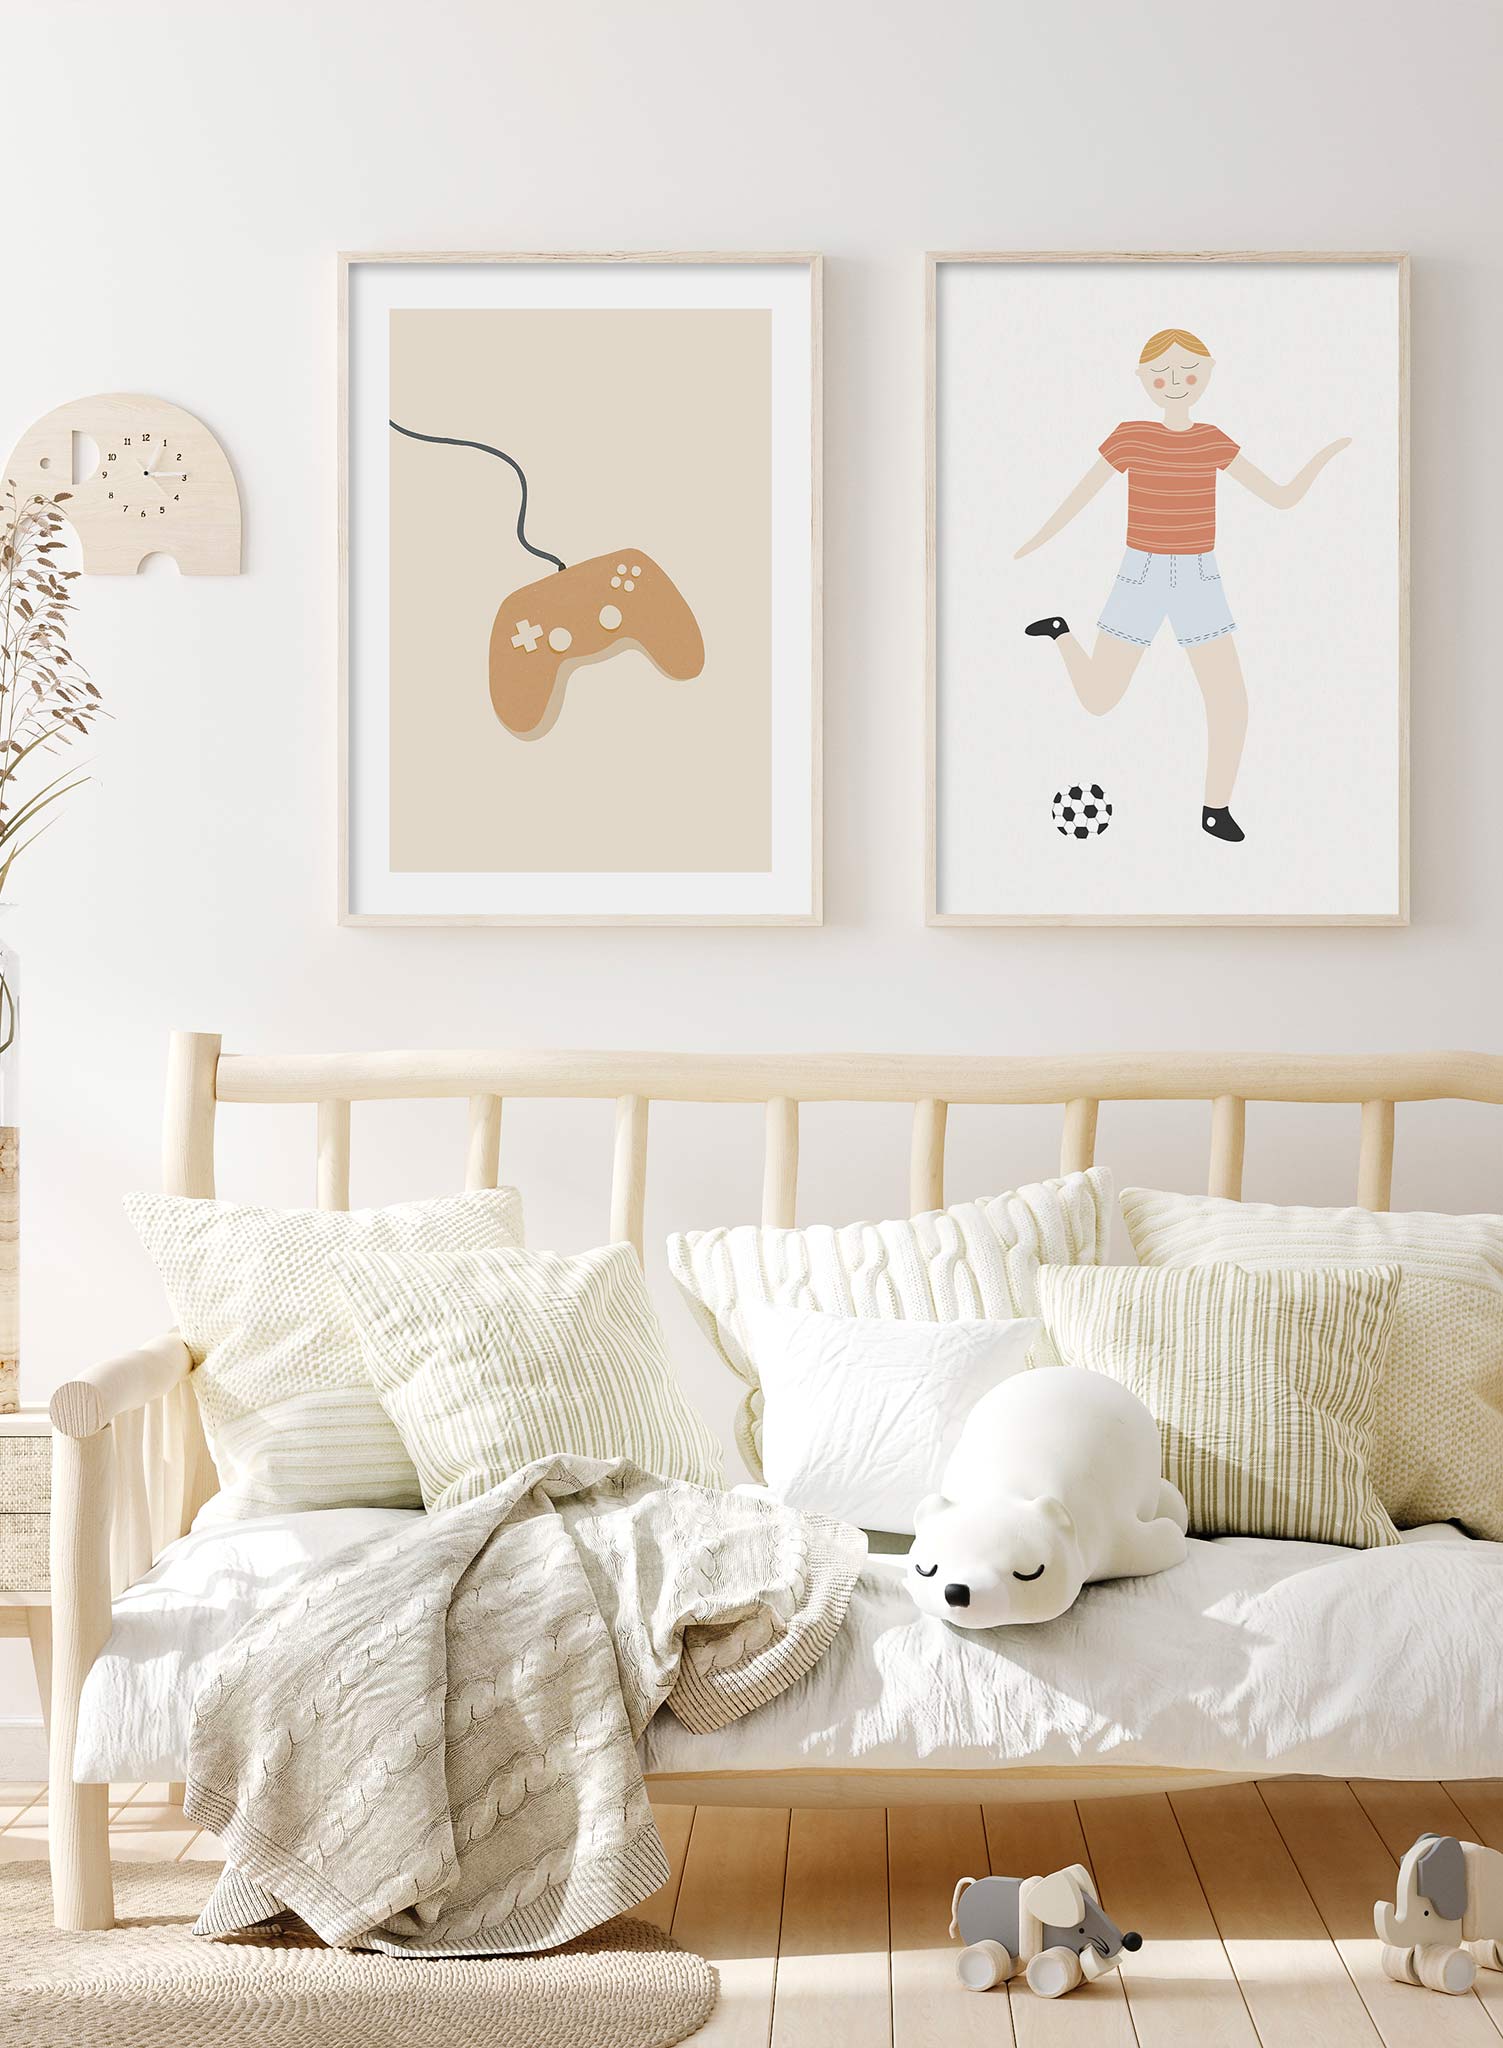 Perfect Score is a minimalist illustration by Opposite Wall of a traditional wired game controller.